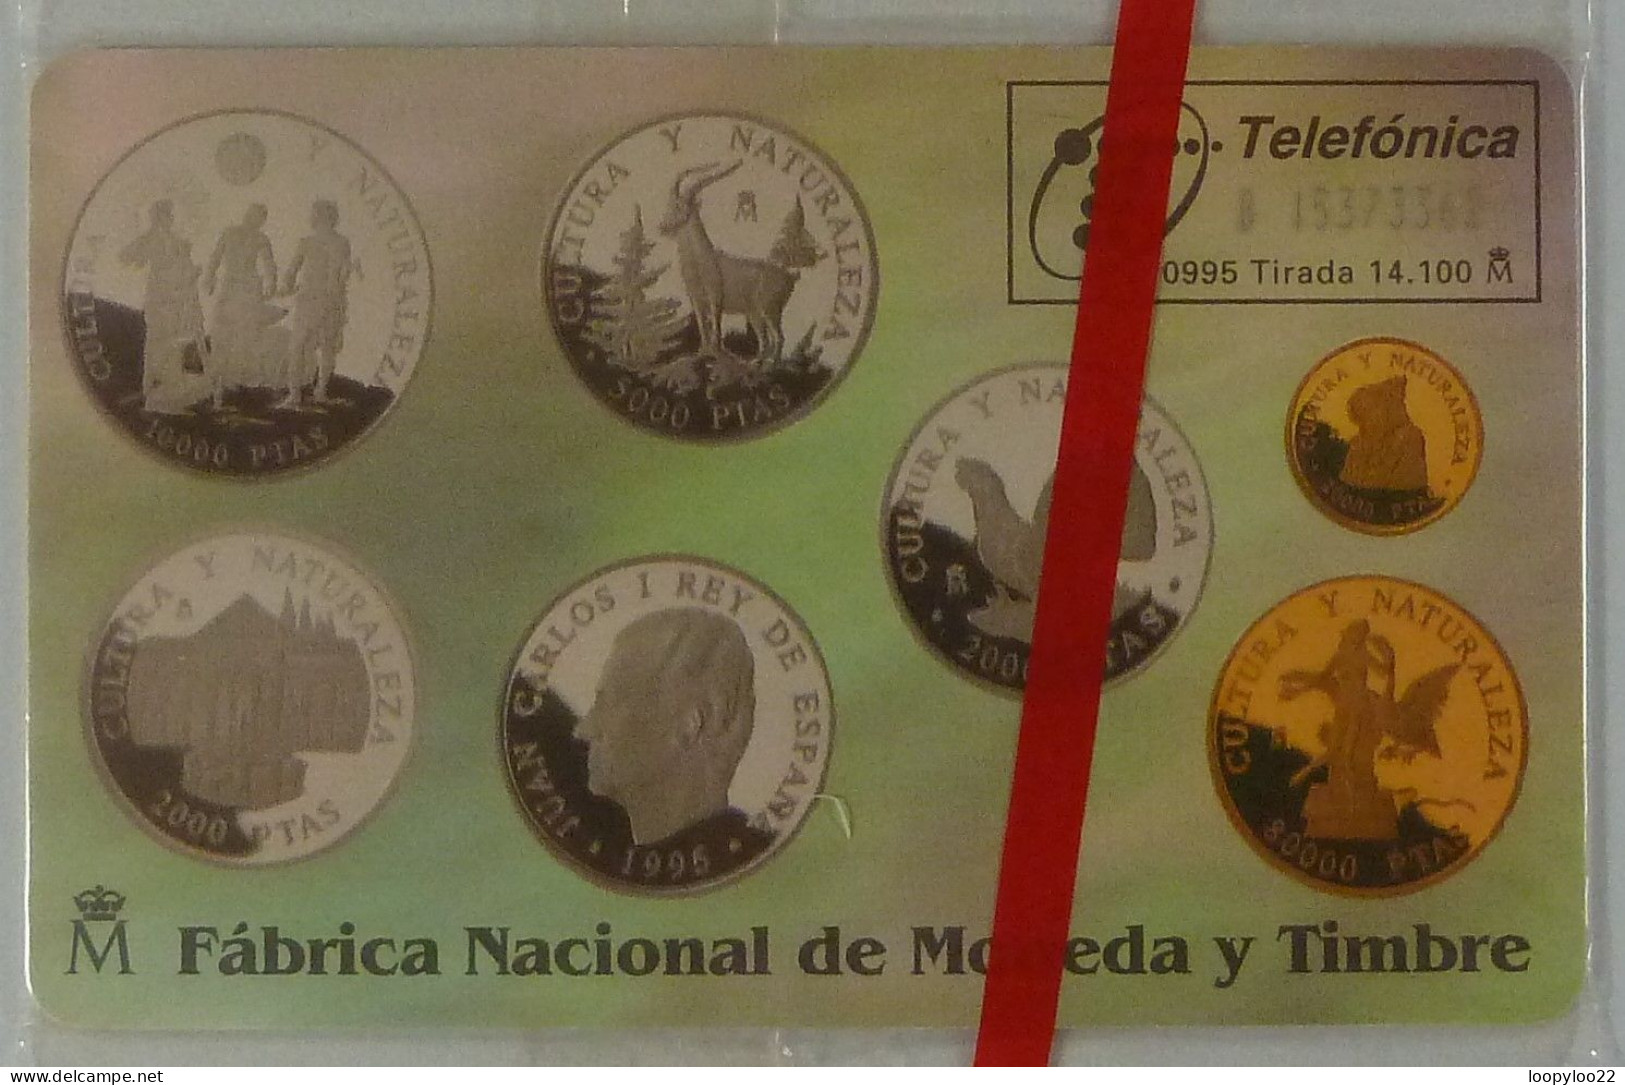 SPAIN - Chip - 100 Units - P-151 - Monedas Conmemoratives II - 09/95 - 14100ex - Mint Blister - Private Issues